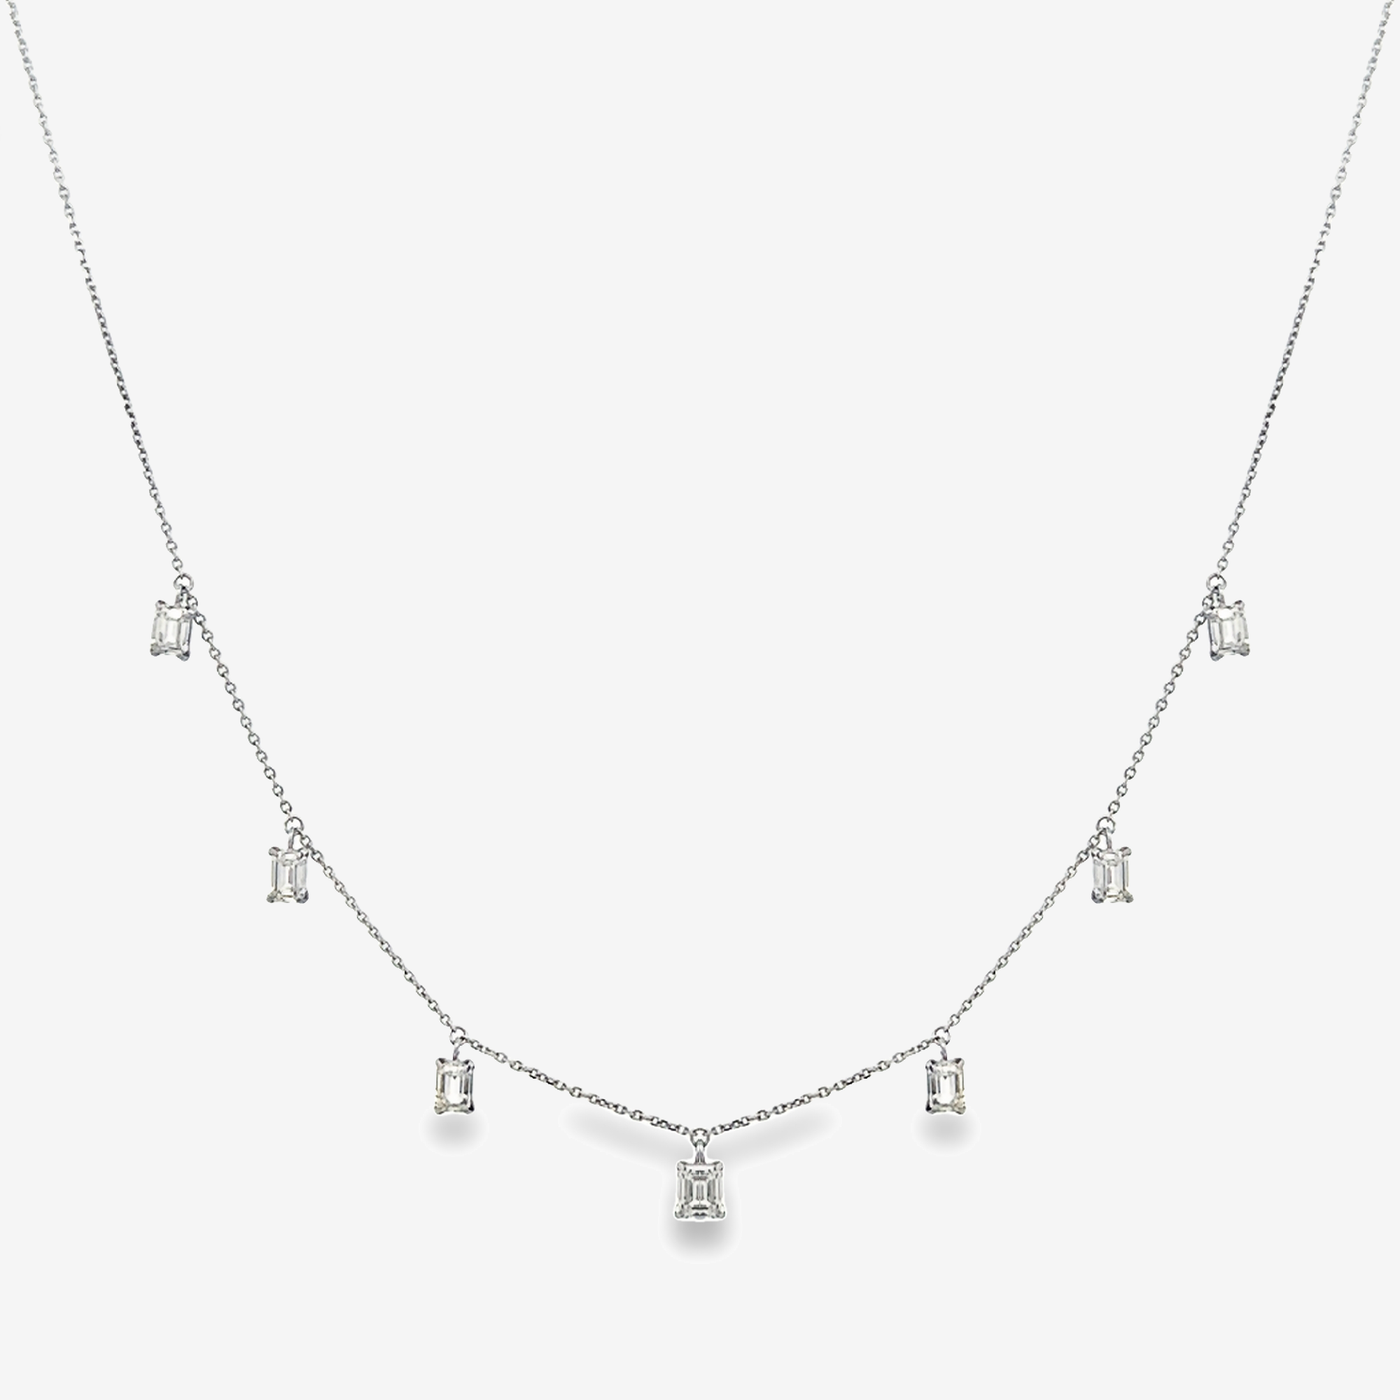 emerald cut diamond drops by the yard necklace